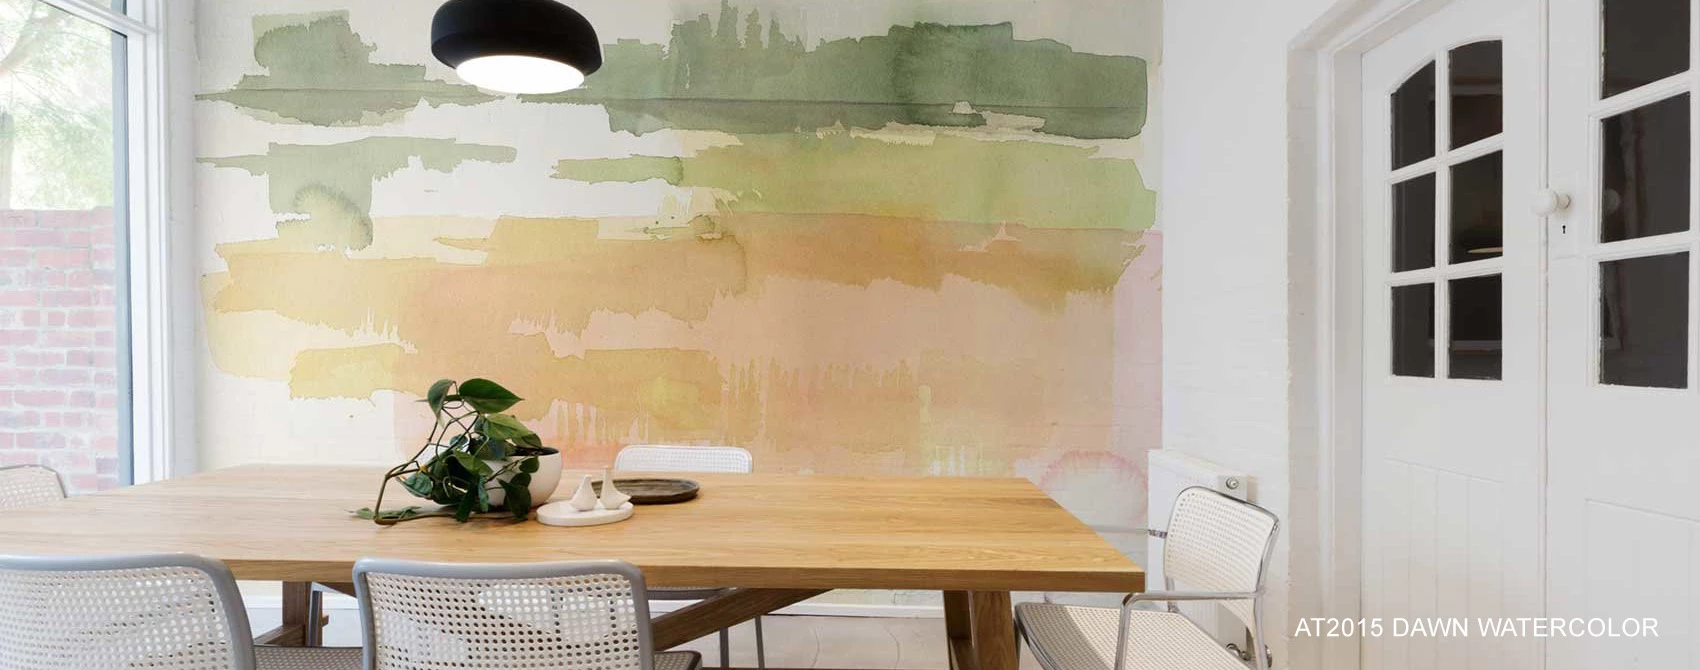 18 Dining Room Wallpaper Ideas Thatll Elevate All Your Dinner Parties